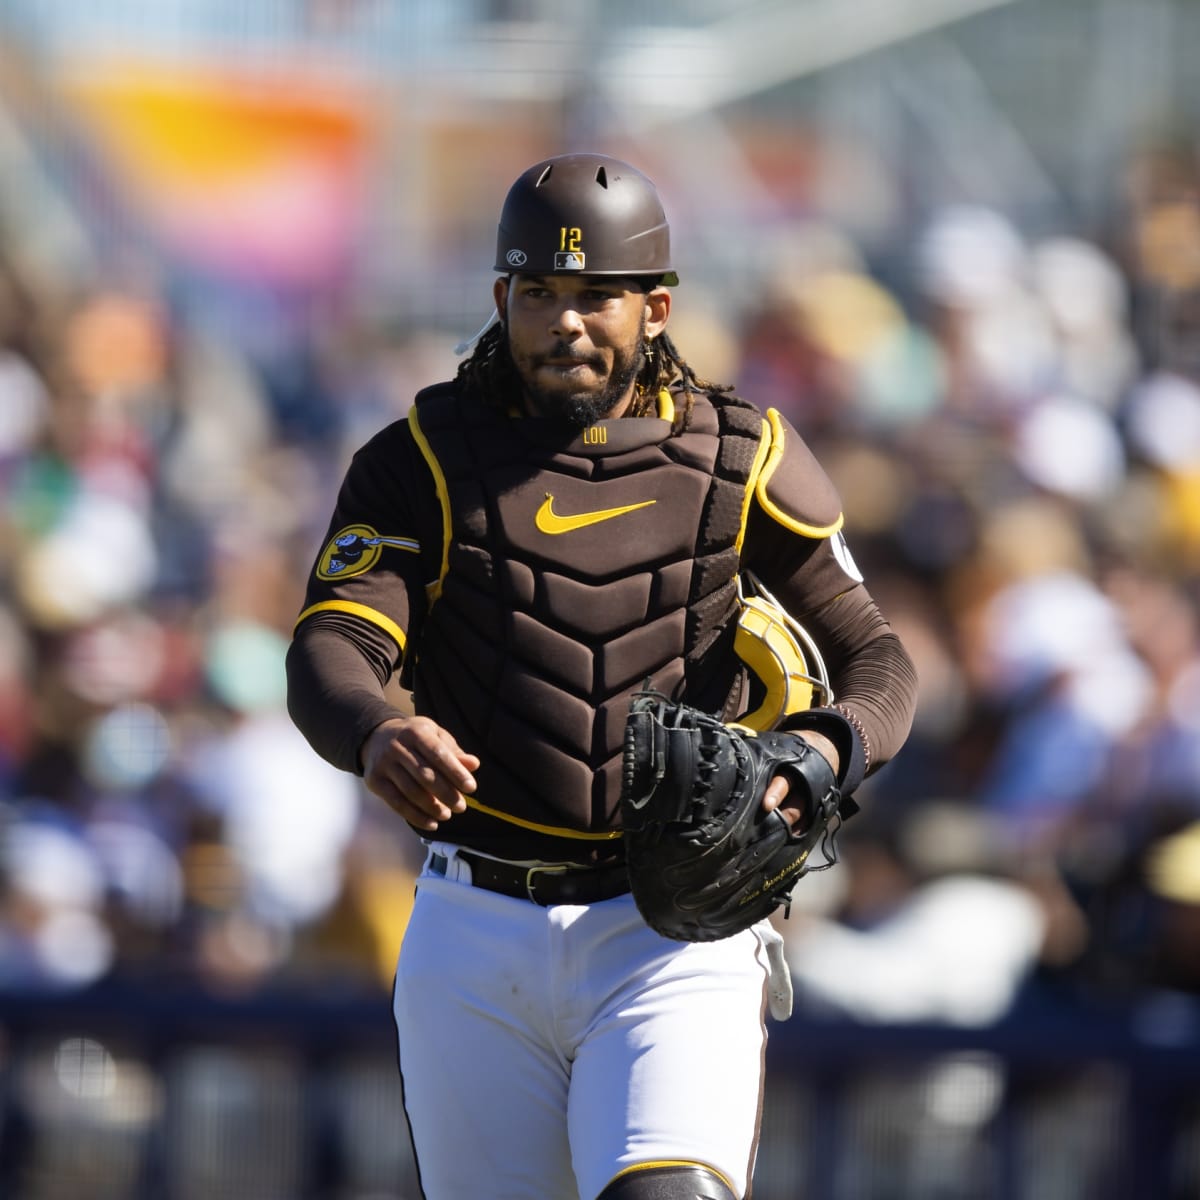 Former Padres Catcher Opts Out of Deal With AL Team, Could Friars Bring Him  Back? - Sports Illustrated Inside The Padres News, Analysis and More